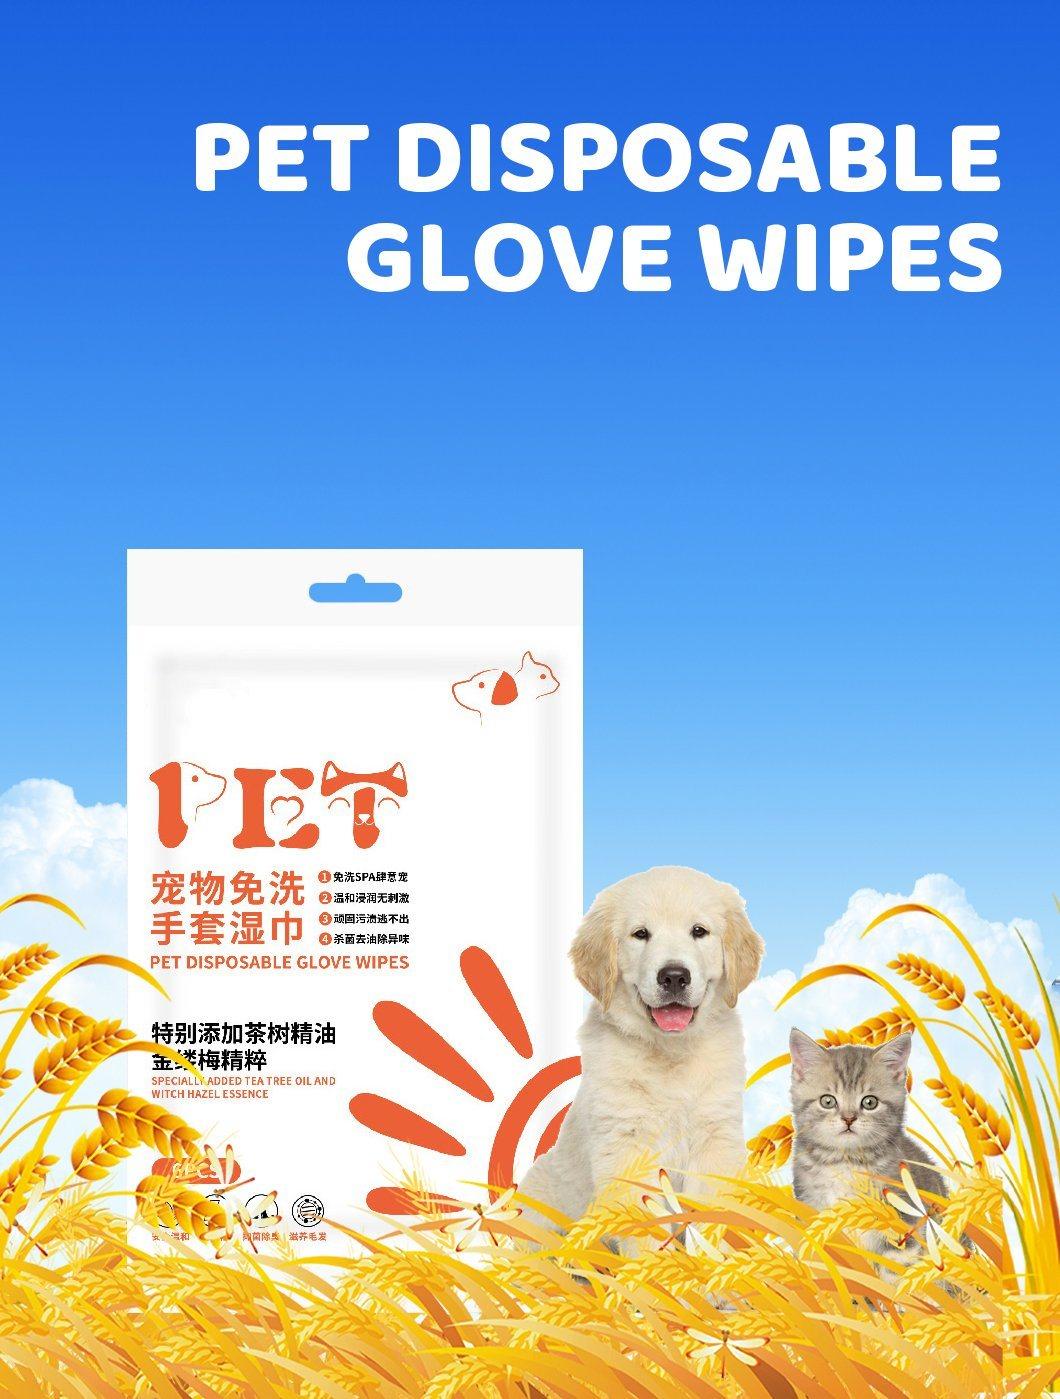 Finger Style Wipes with Special Plant Extract Liquid and Unscented Mesh Design Double Cleaness Soft for Pets Body 6PCS Formula for Cleaning Wipes Antibacteria